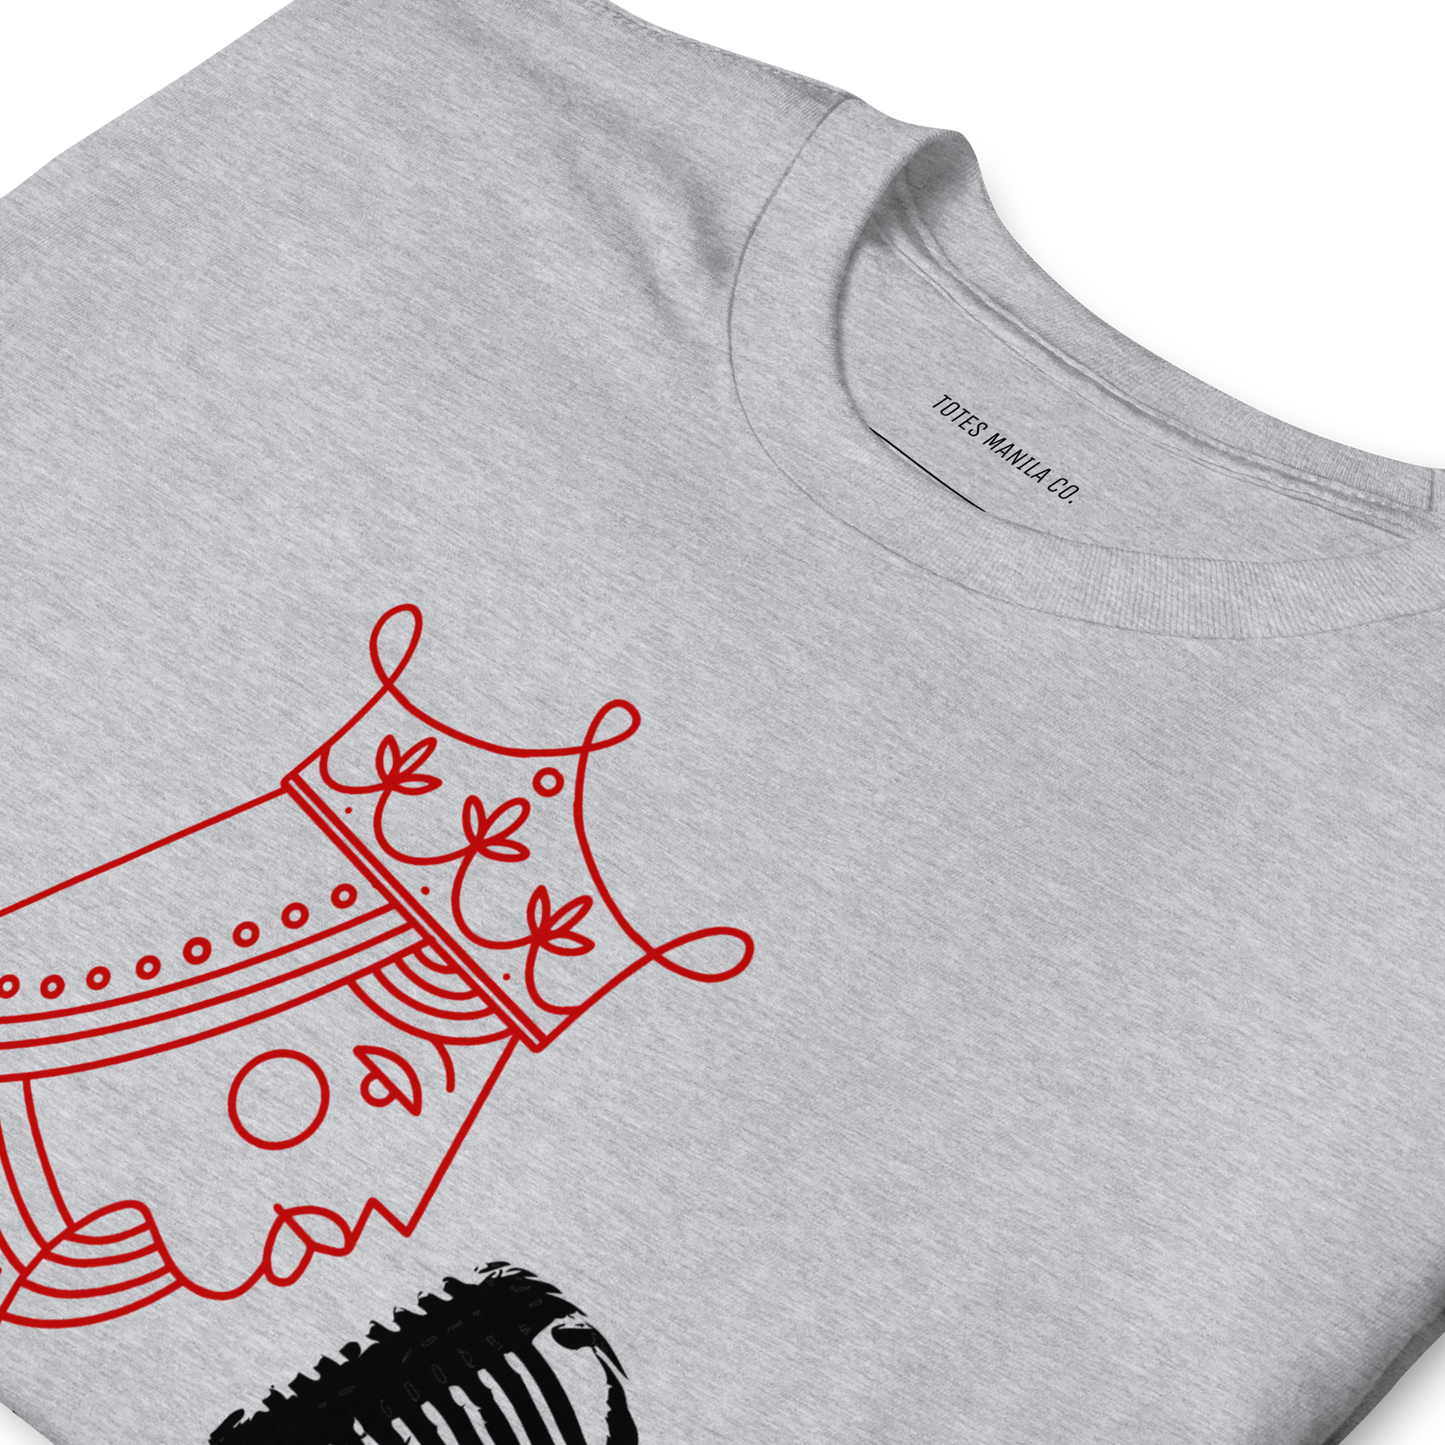 Close up of the Karaoke Queen design printed on the center chest of a gray unisex shirt.